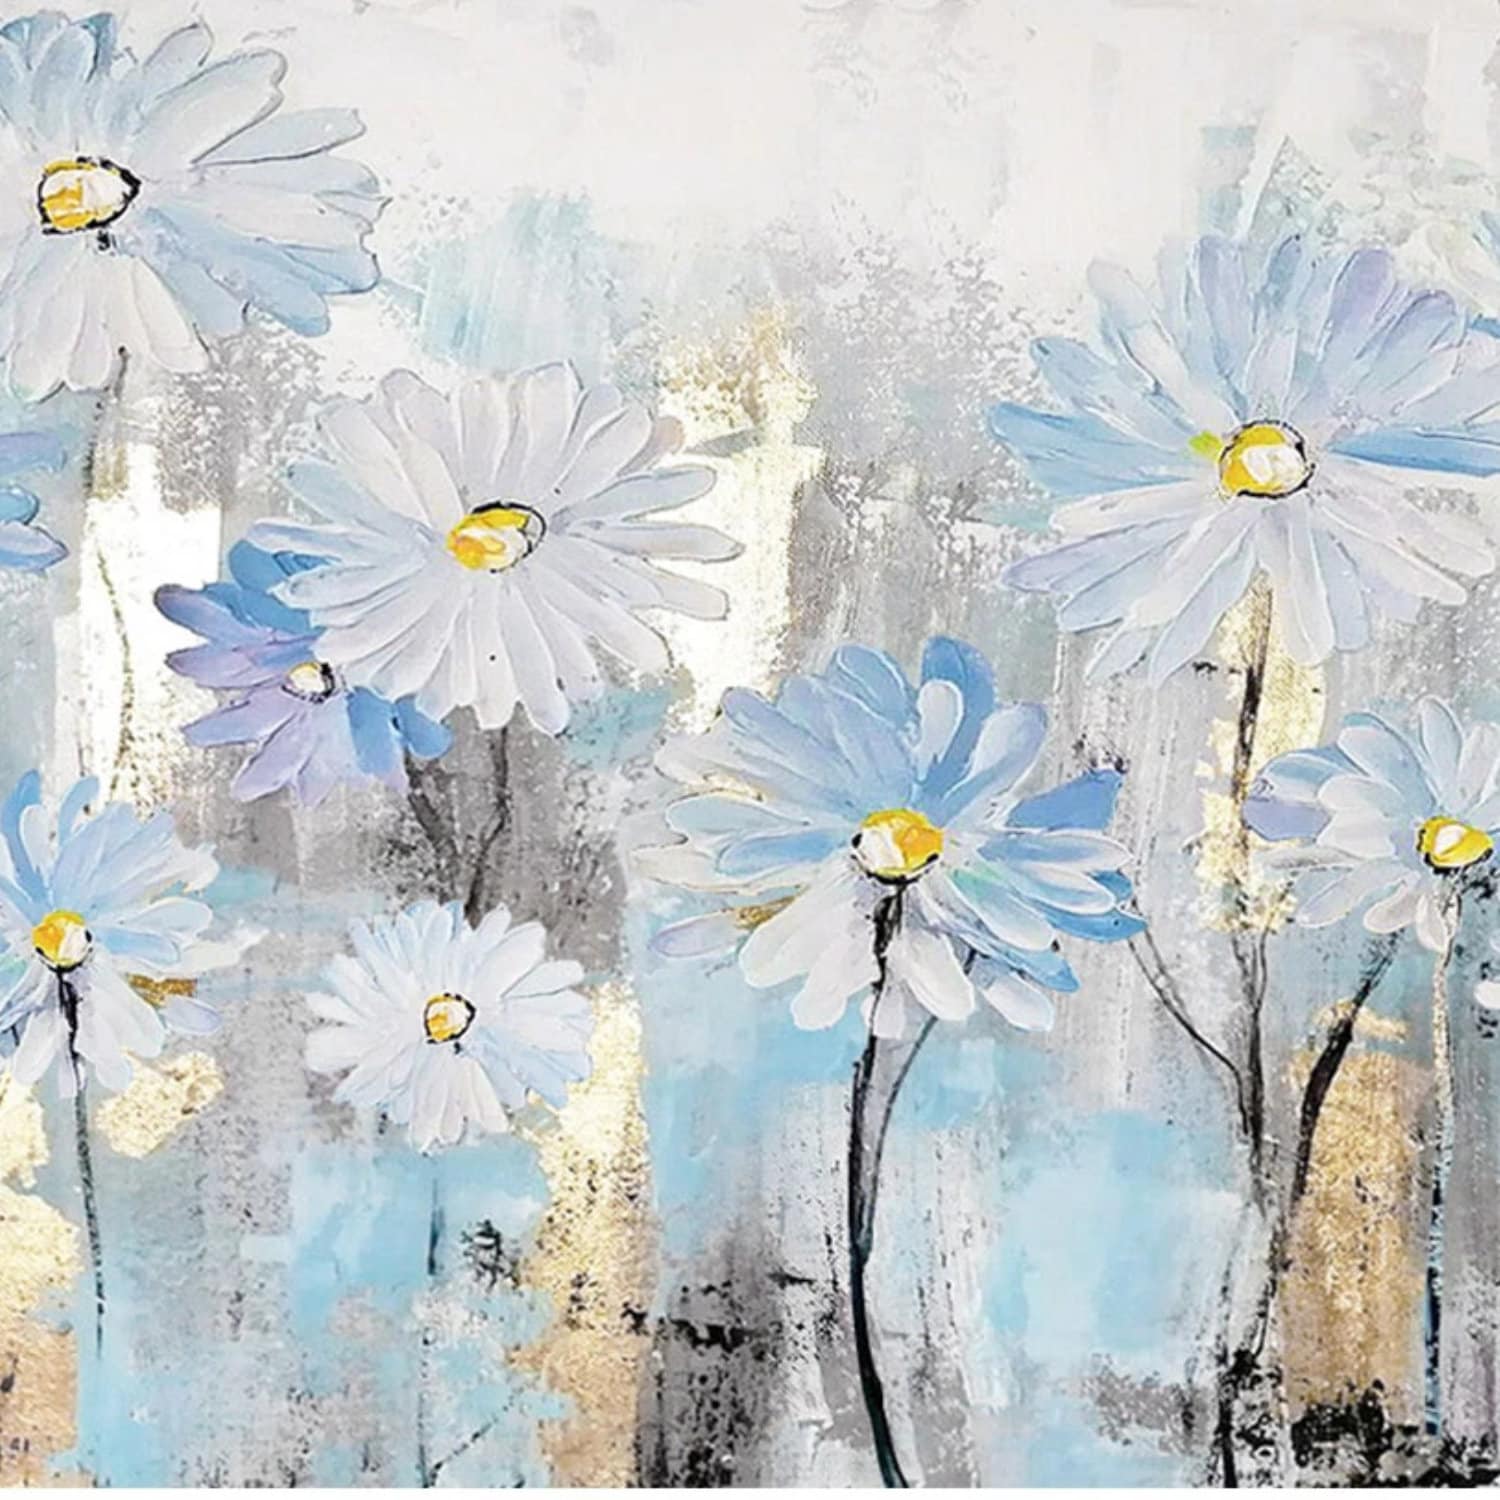 Abstract White Daisy Flowers 100% Hand Painted Art